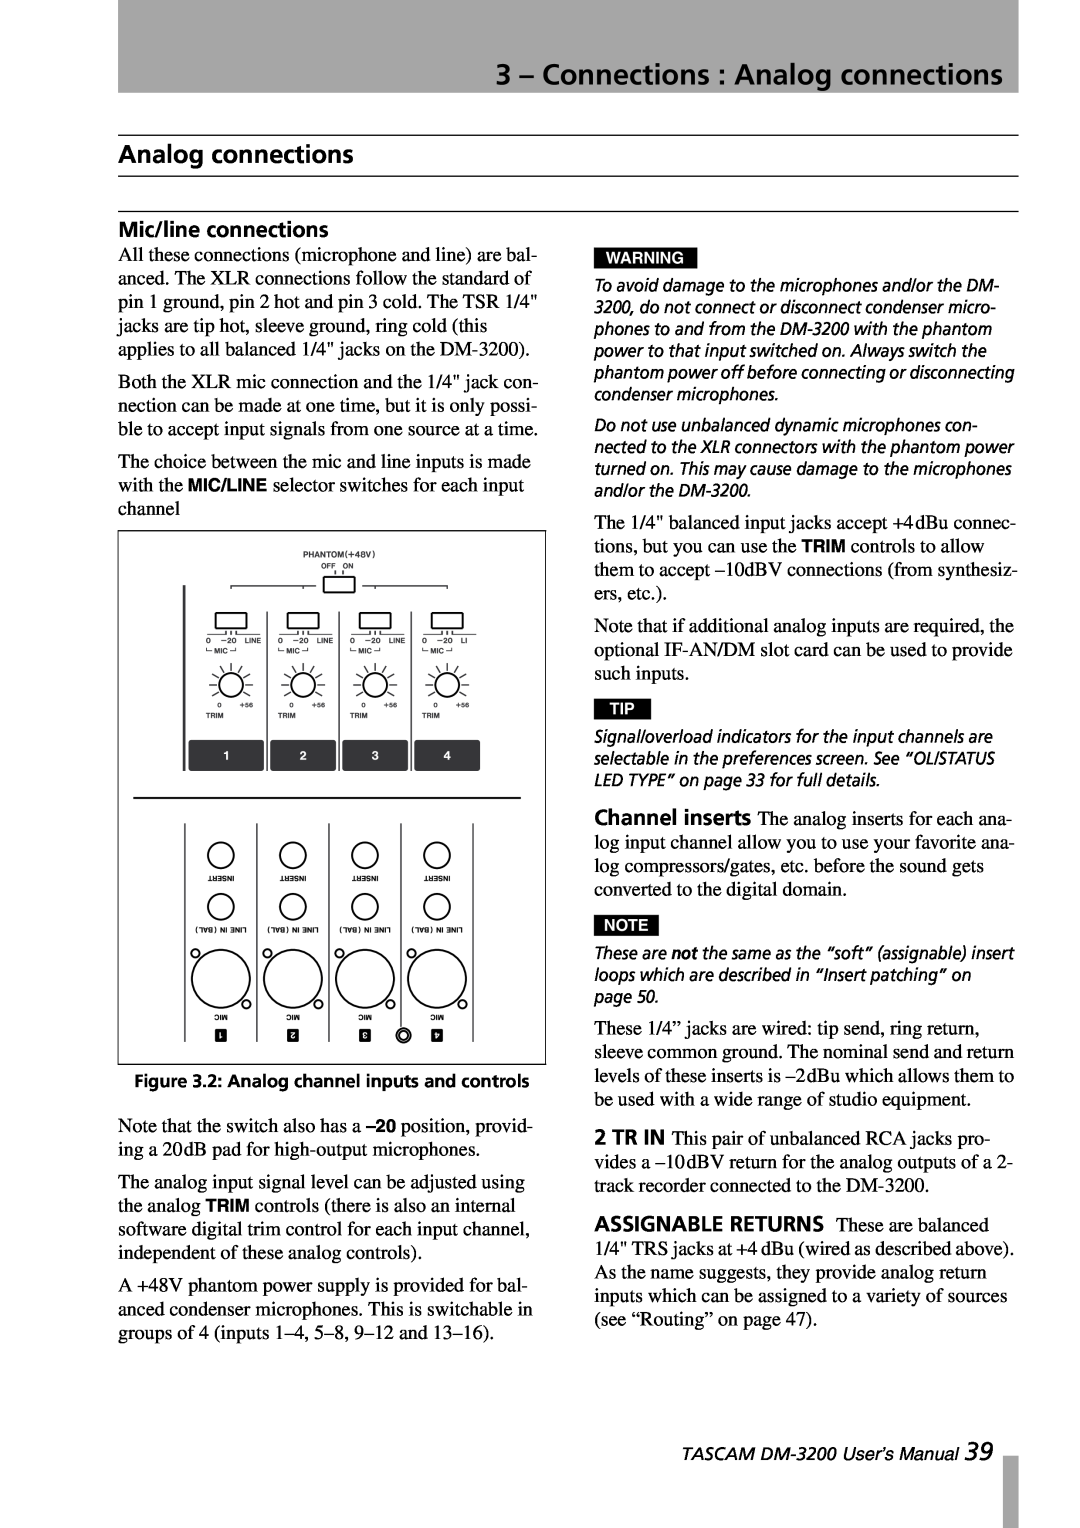 Tascam DM-3200 owner manual 3 – Connections : Analog connections, Mic/line connections 